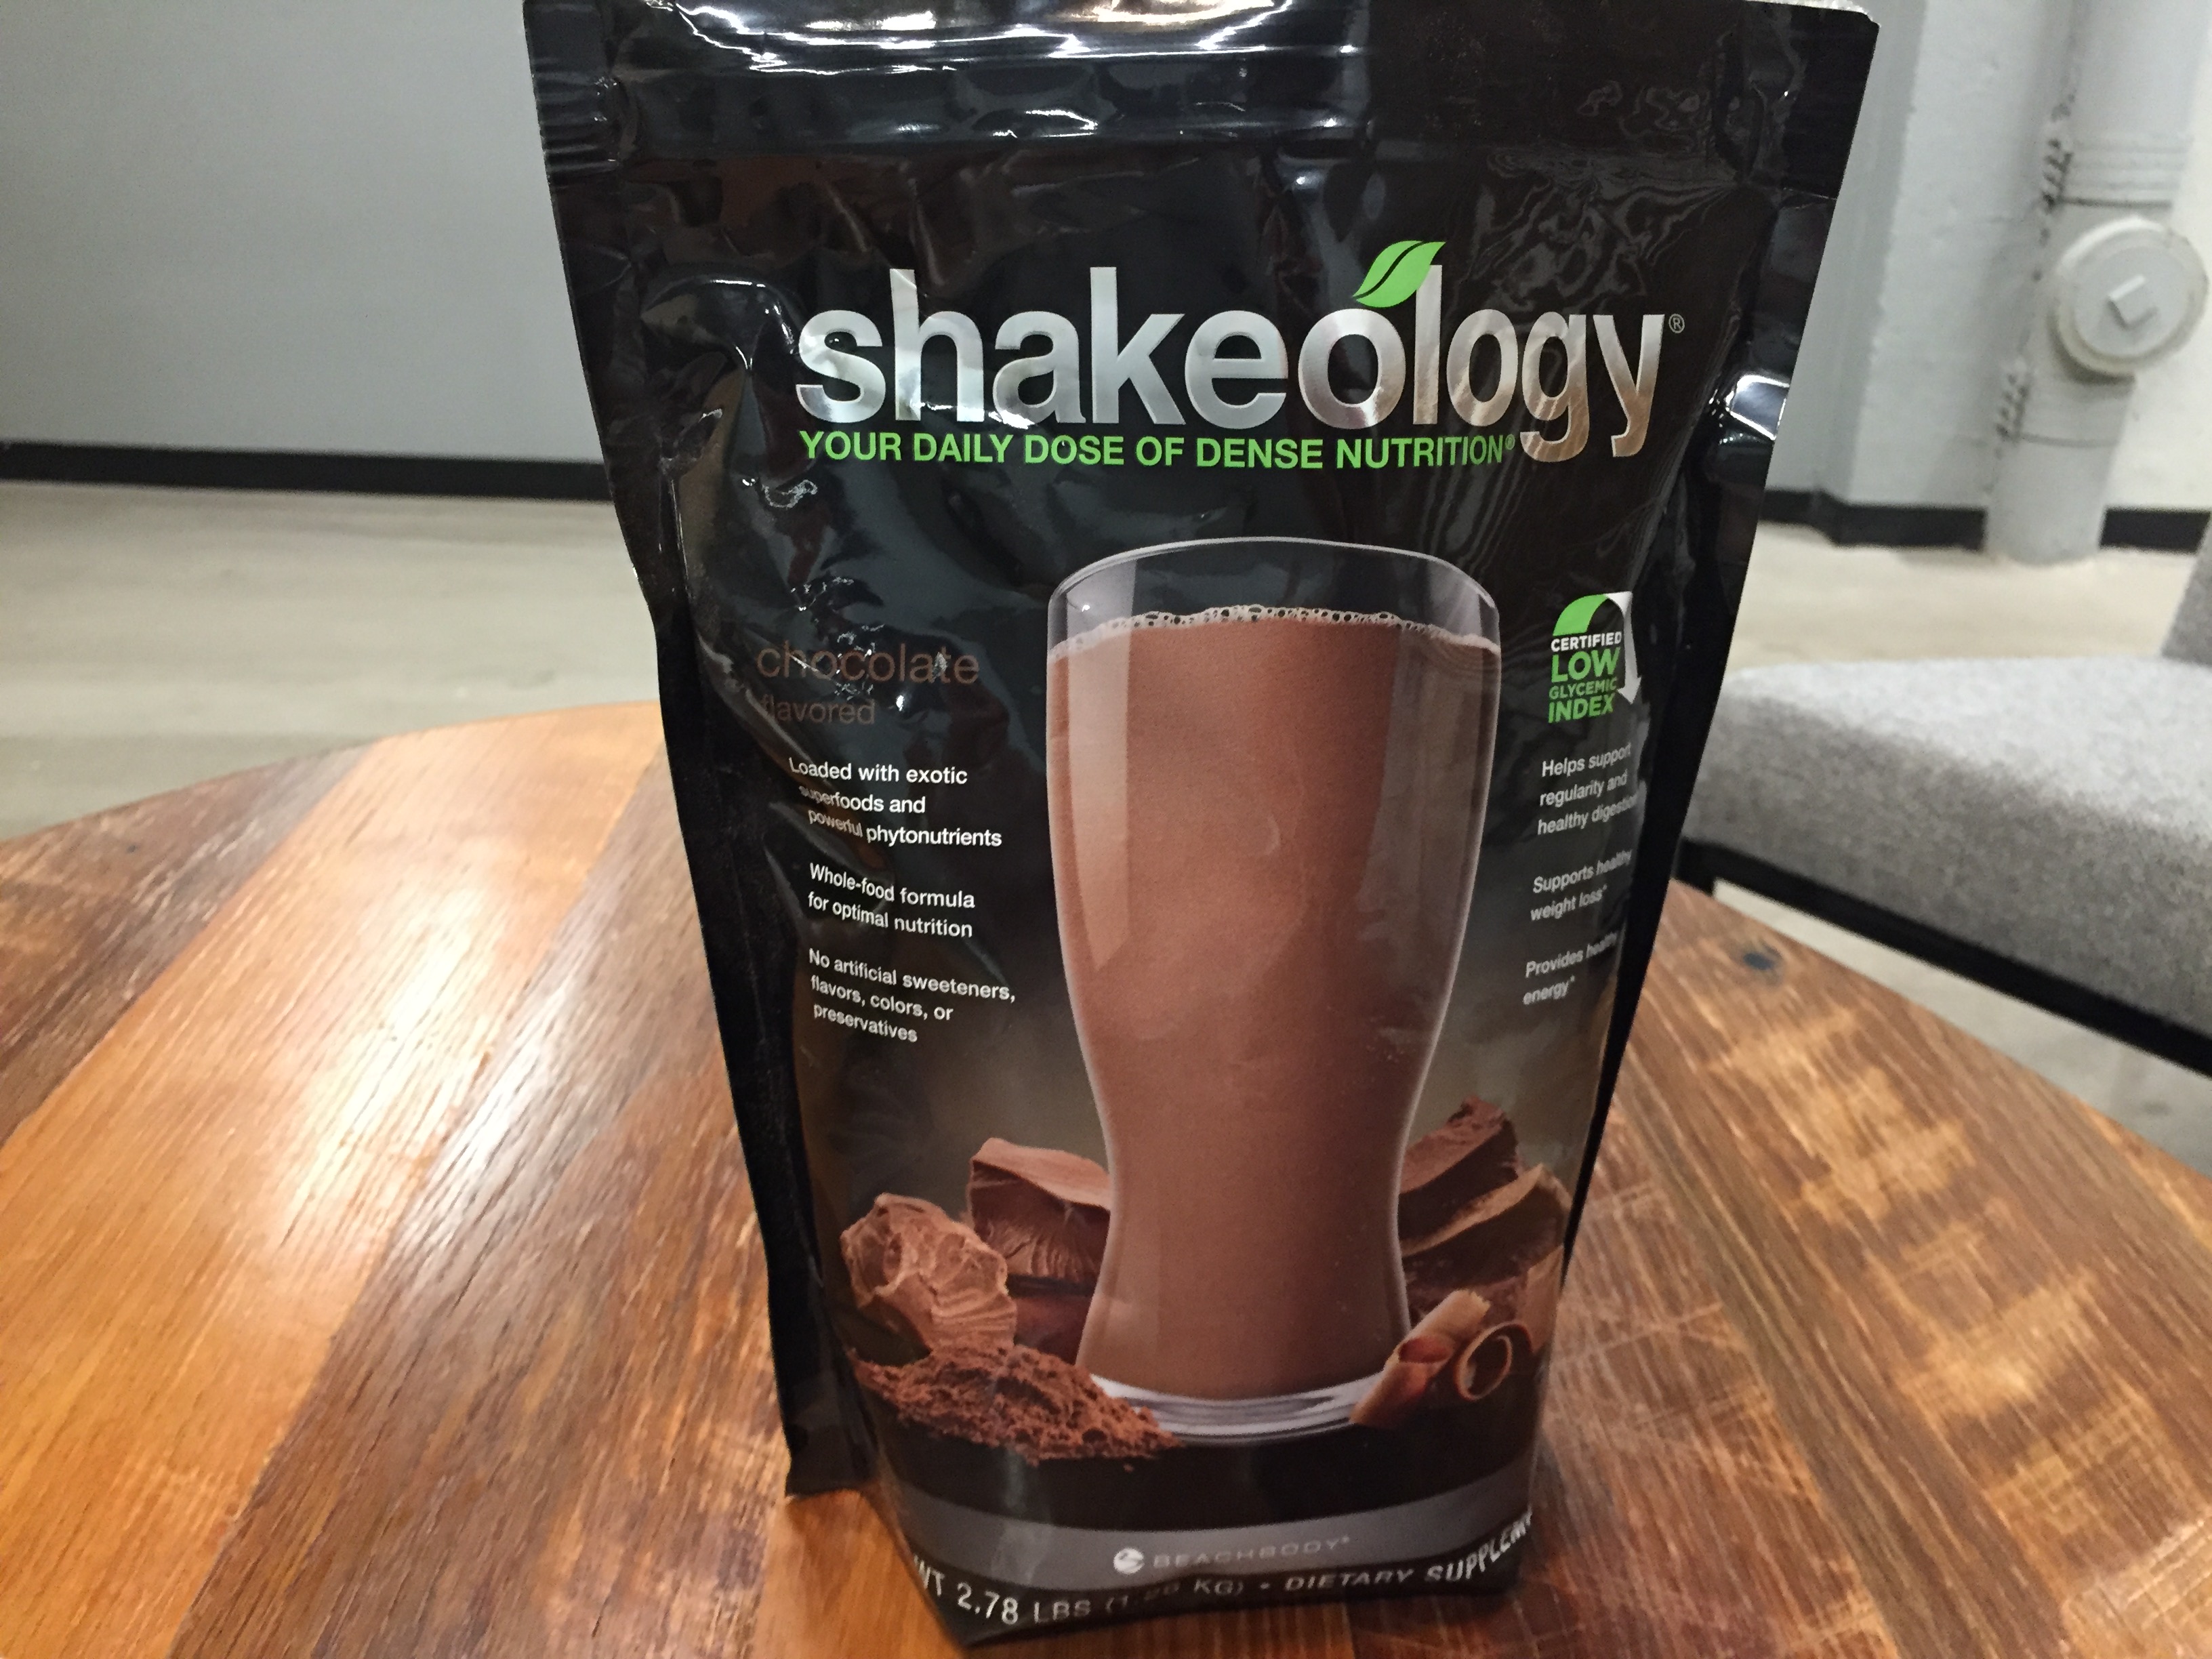 The Facts About Athletic Greens Vs Shakeology (2021 Review) Which Is Better? Revealed